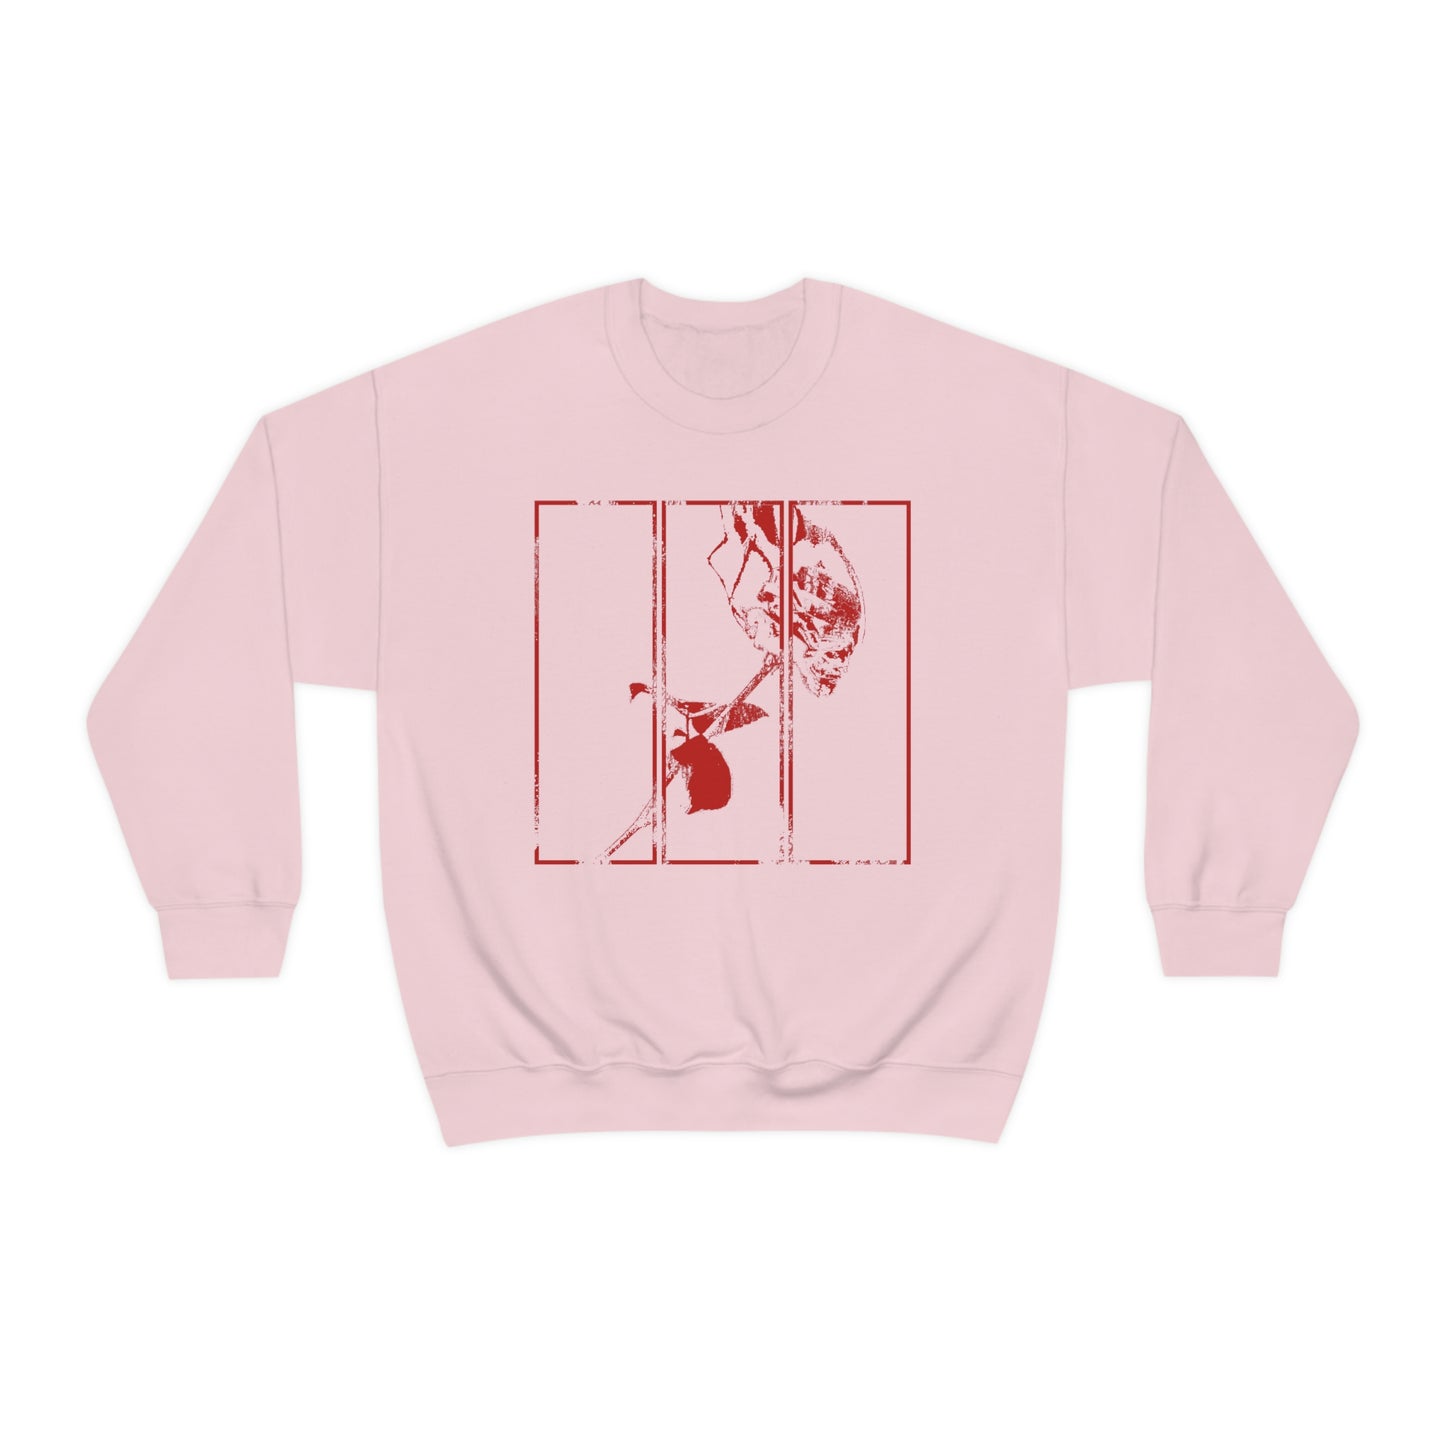 Dead Roses sweatshirt Fire Alternative Clothing Gothic Grunge Clothes Pastel Goth Tee Edgy Clothes E-Girl E-boy Emo Red Roses streetwear